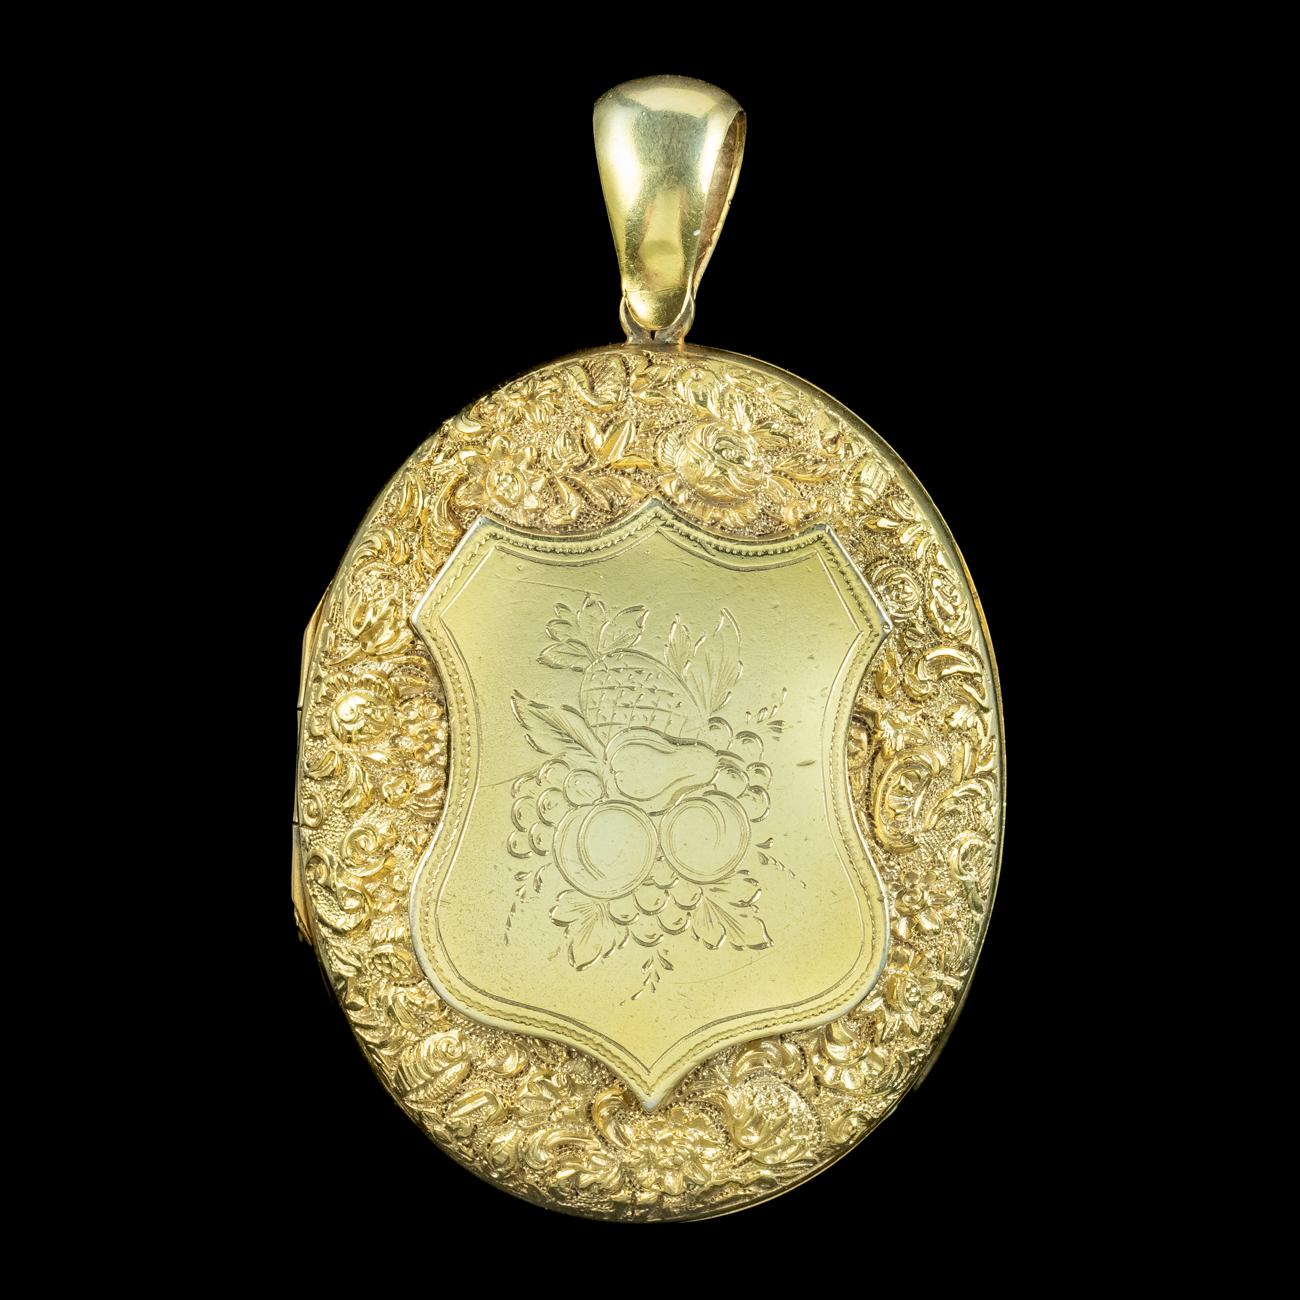 A wonderful 20th Century locket featuring intricate, floral artistry embossed across the front and a large shield in the centre etched with a collection of fruit, including grapes, peaches, a pear and pineapple.  

The piece is all solid sterling